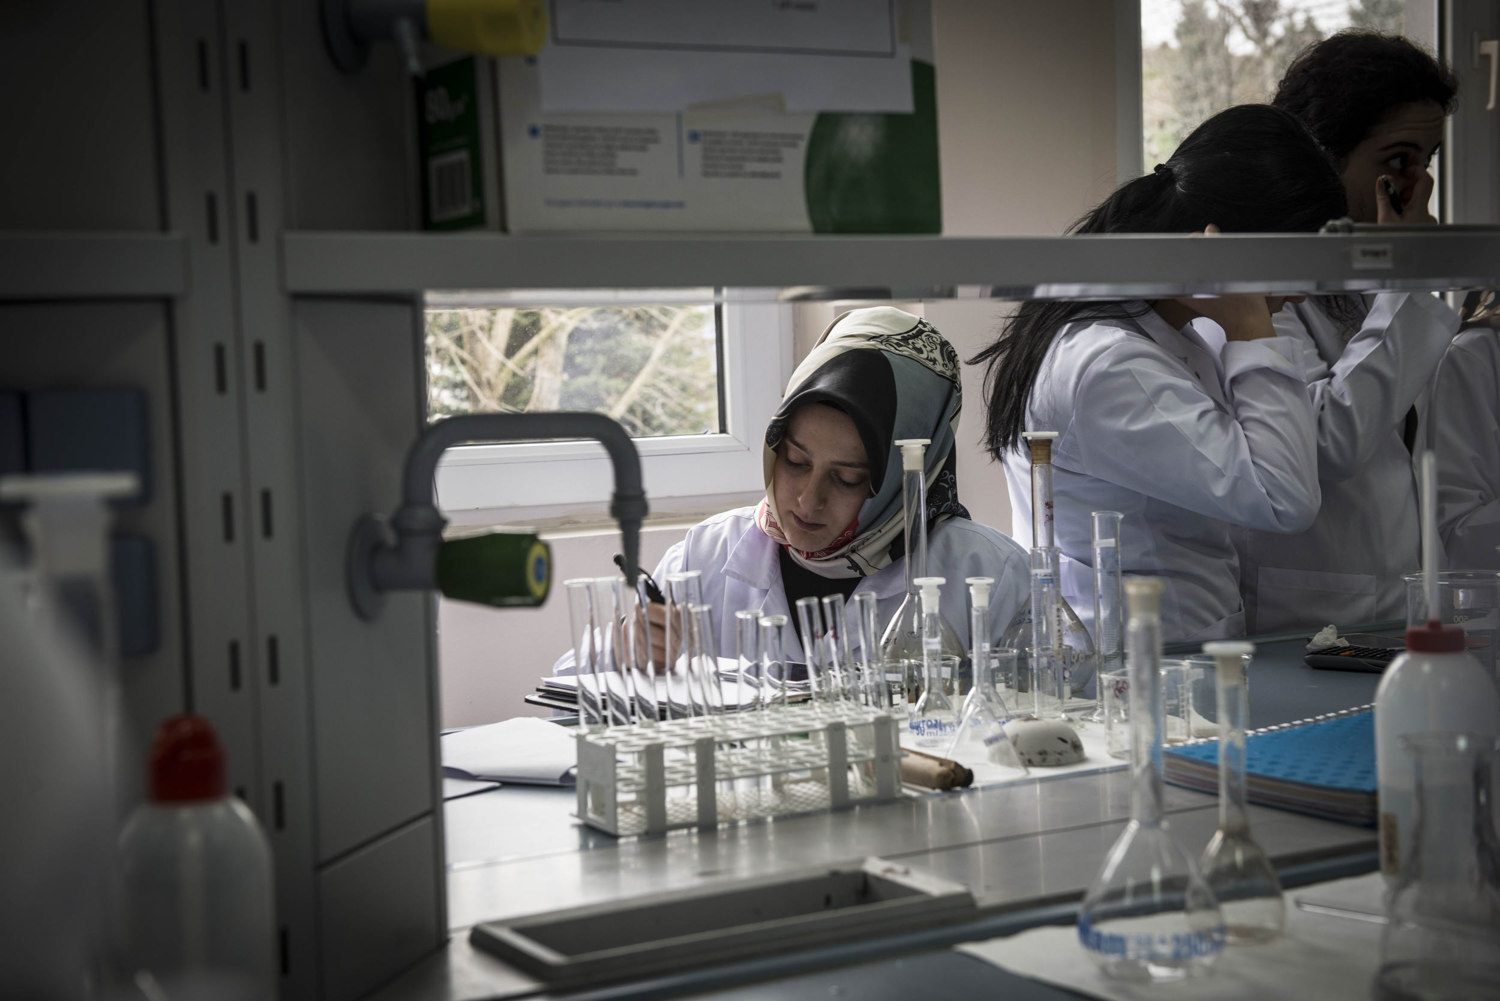  At Istanbul's Fatih University student completes a Chemistry experiment. 